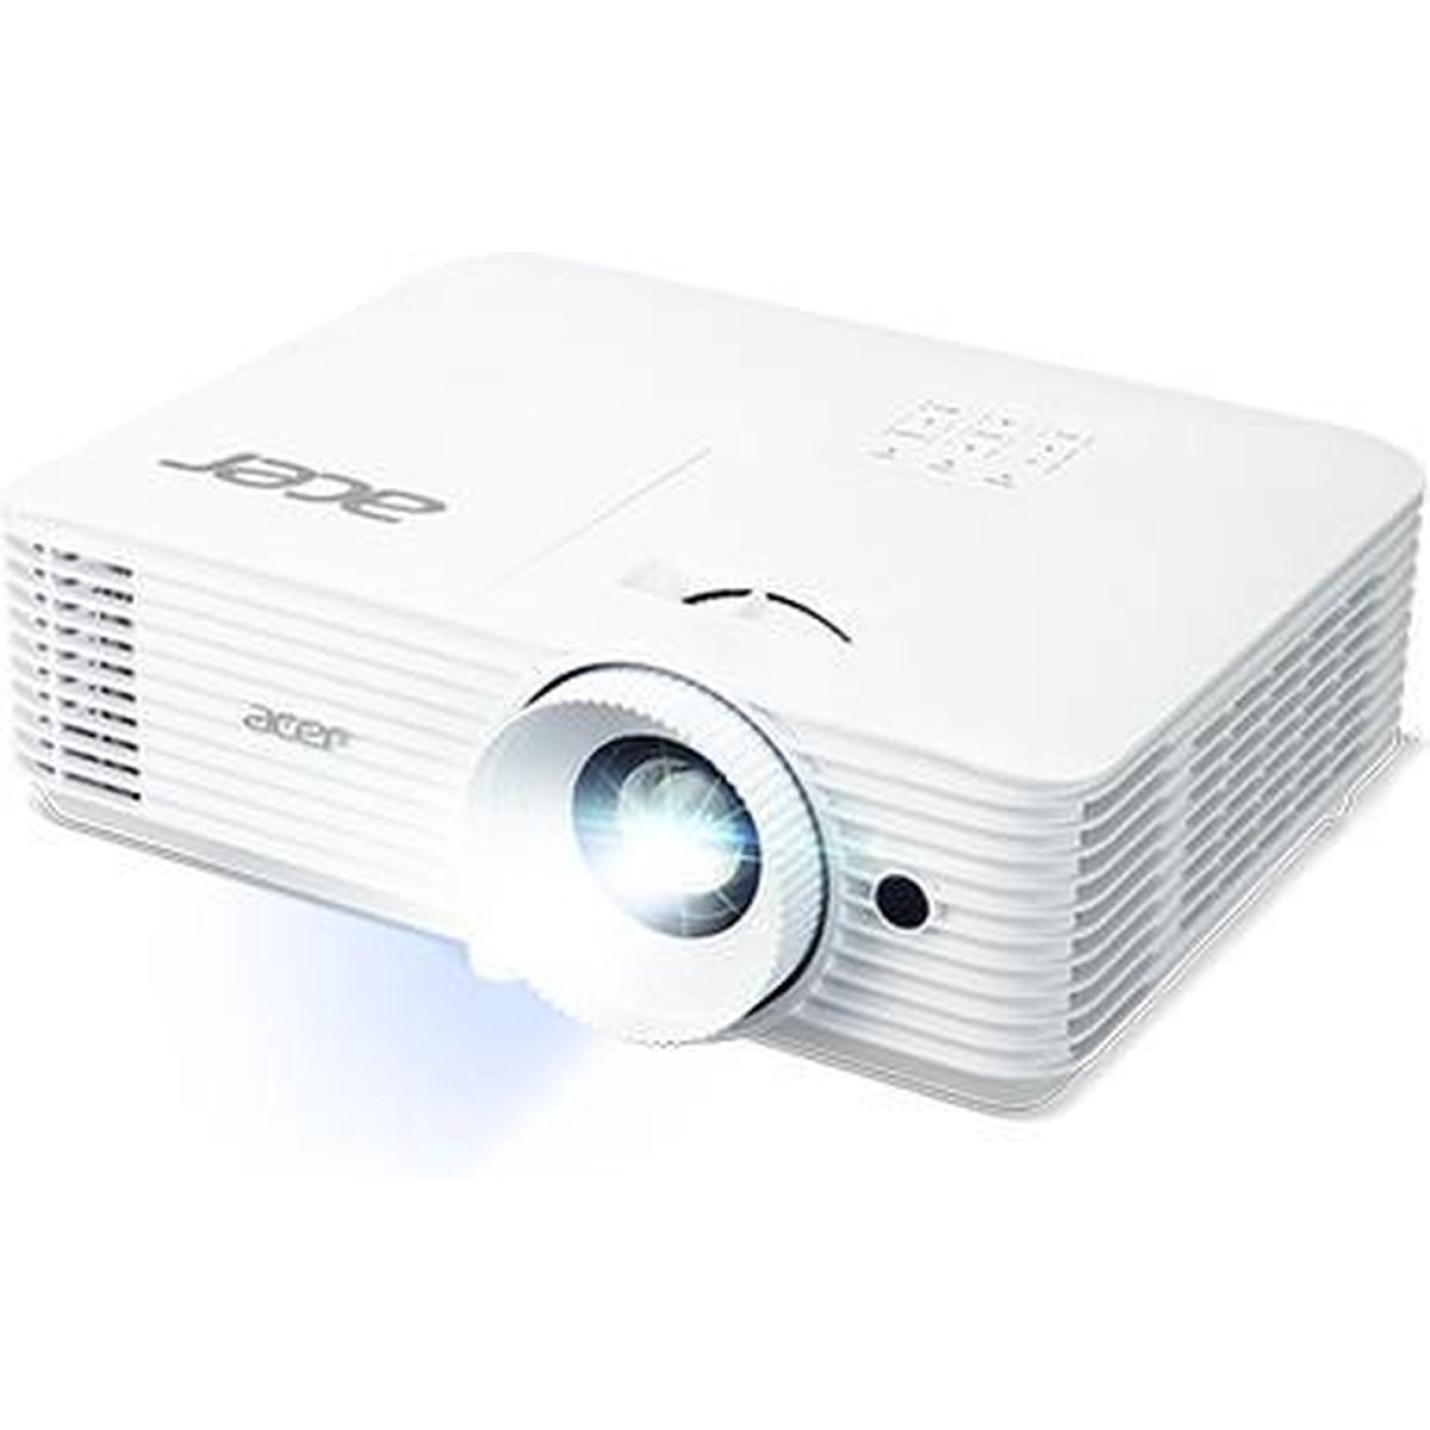 Acer Home H6523BD beamer projector Projector met normale projectieafstand 3500 ANSI lumens DLP 1080p (1920x1080) 3D Wit 4